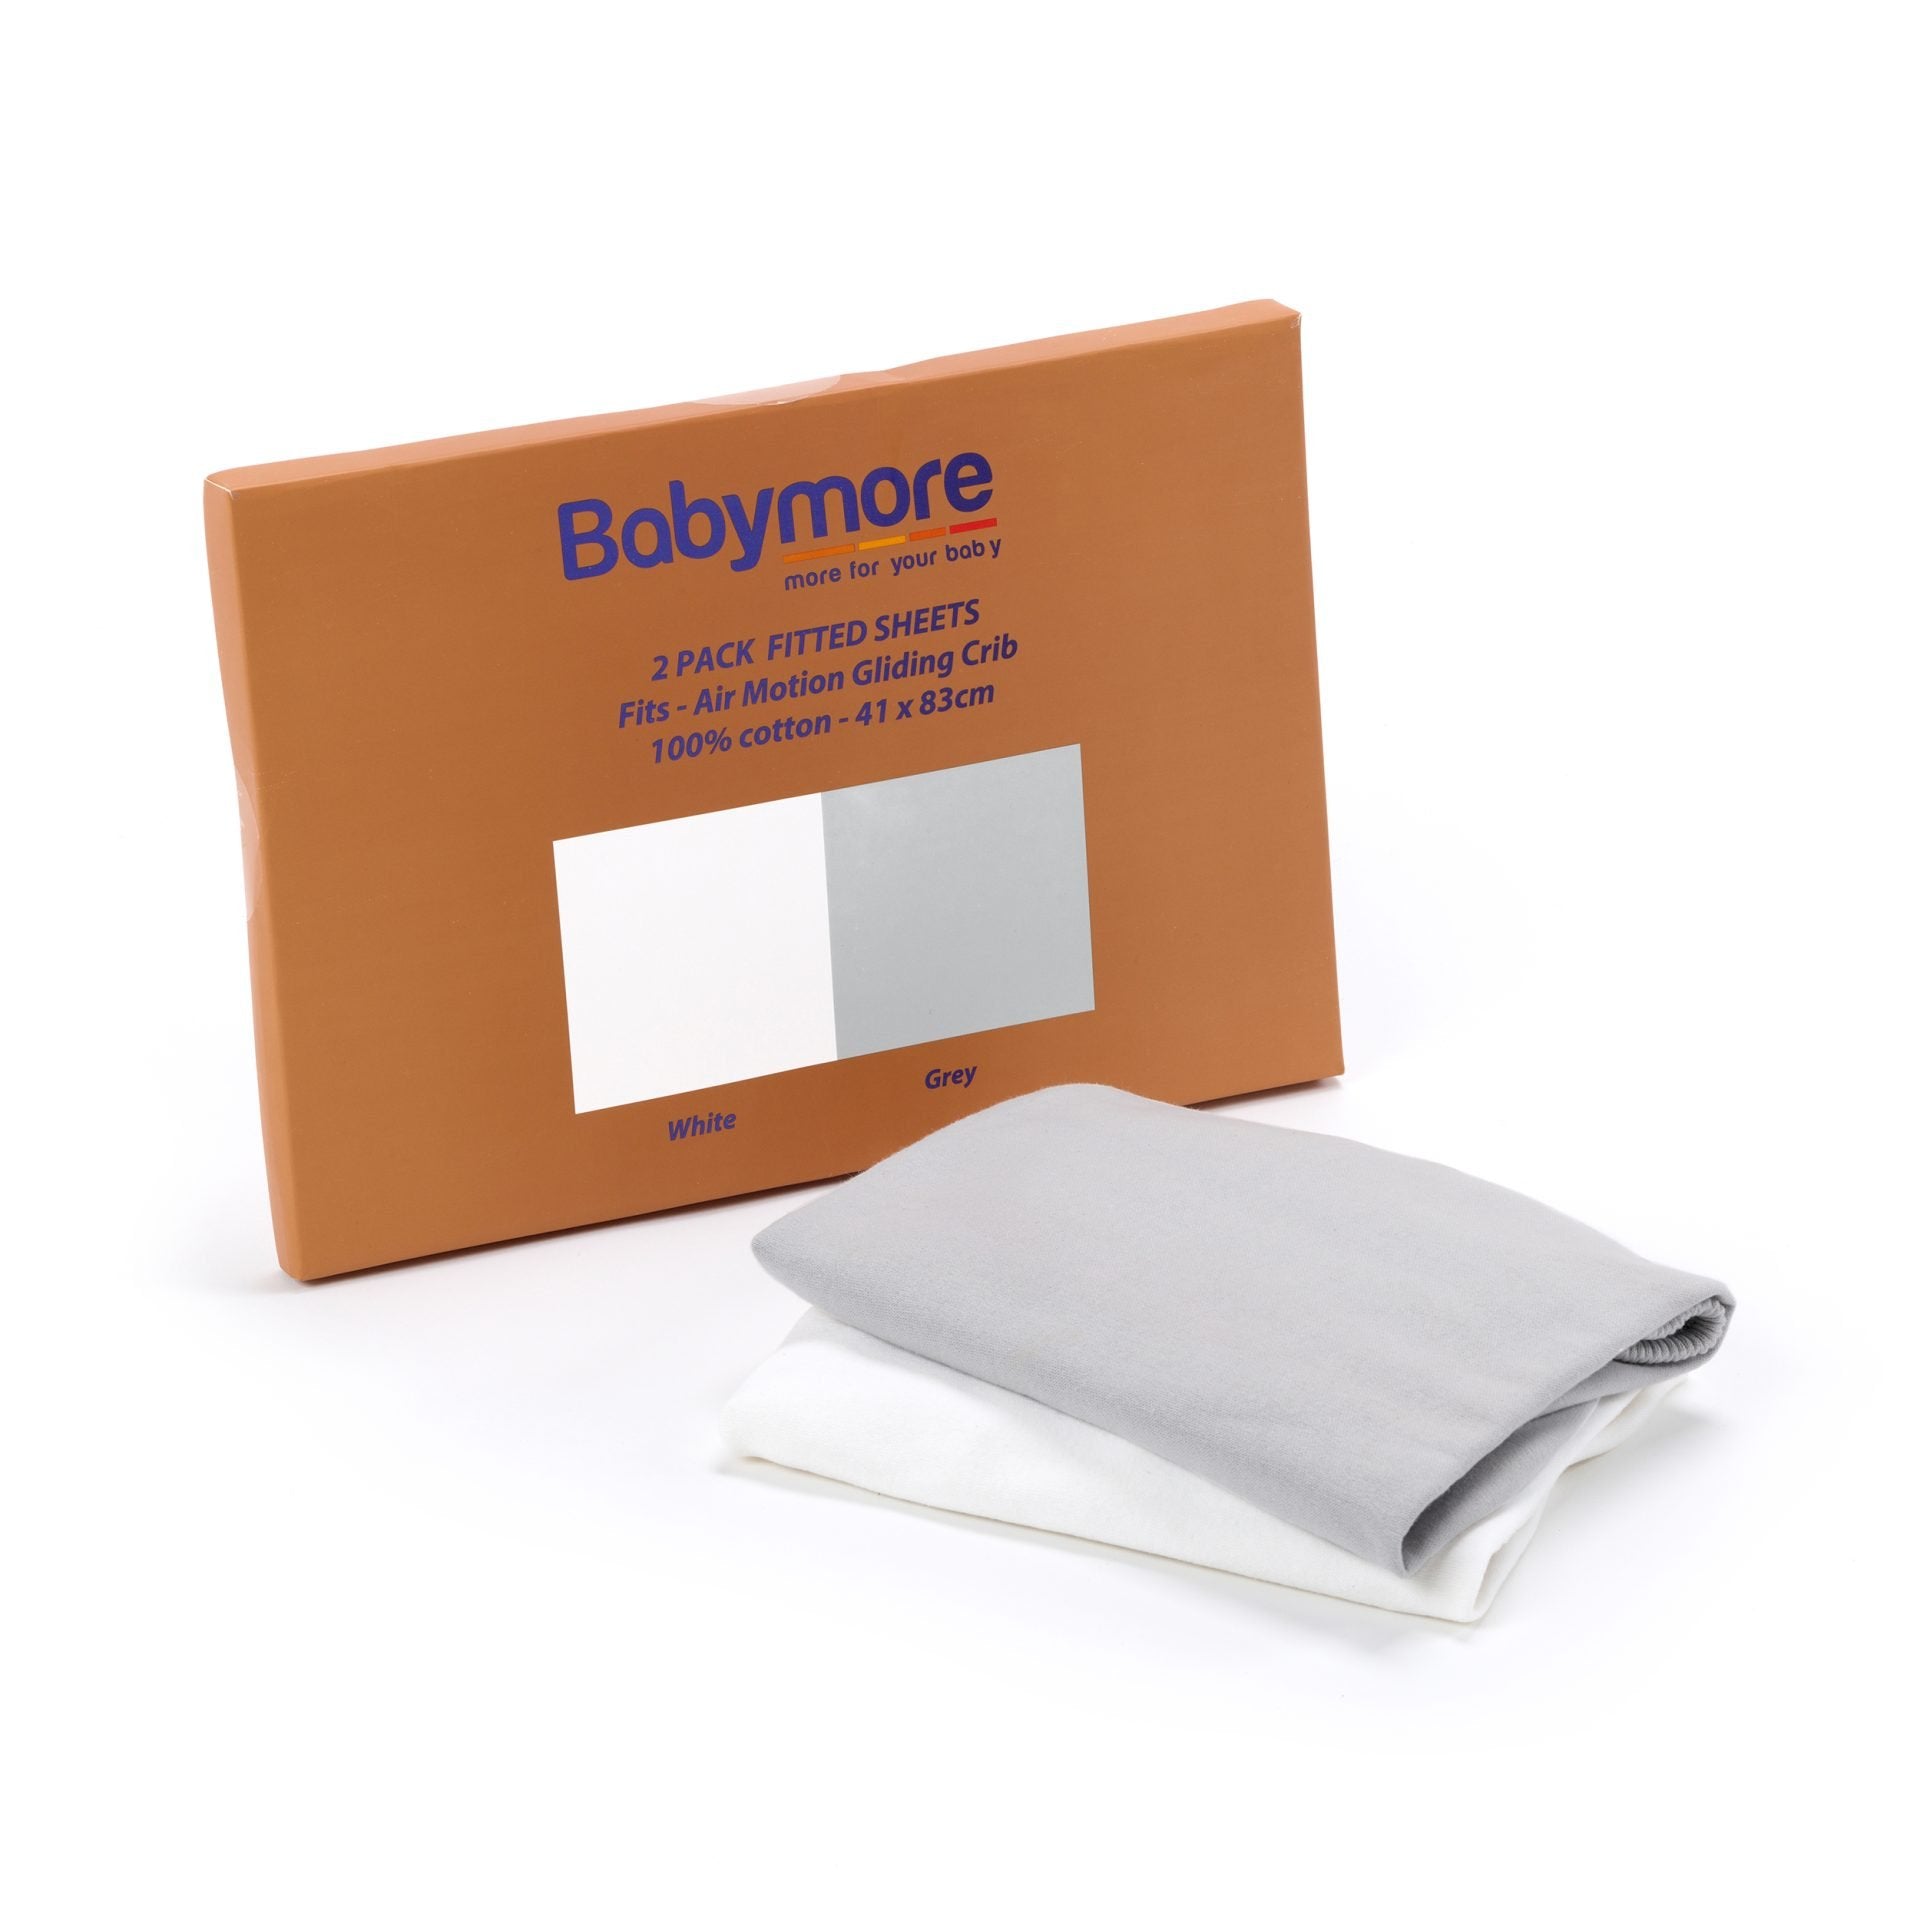 View Babymore Air Motion Fitted Sheets White Grey information